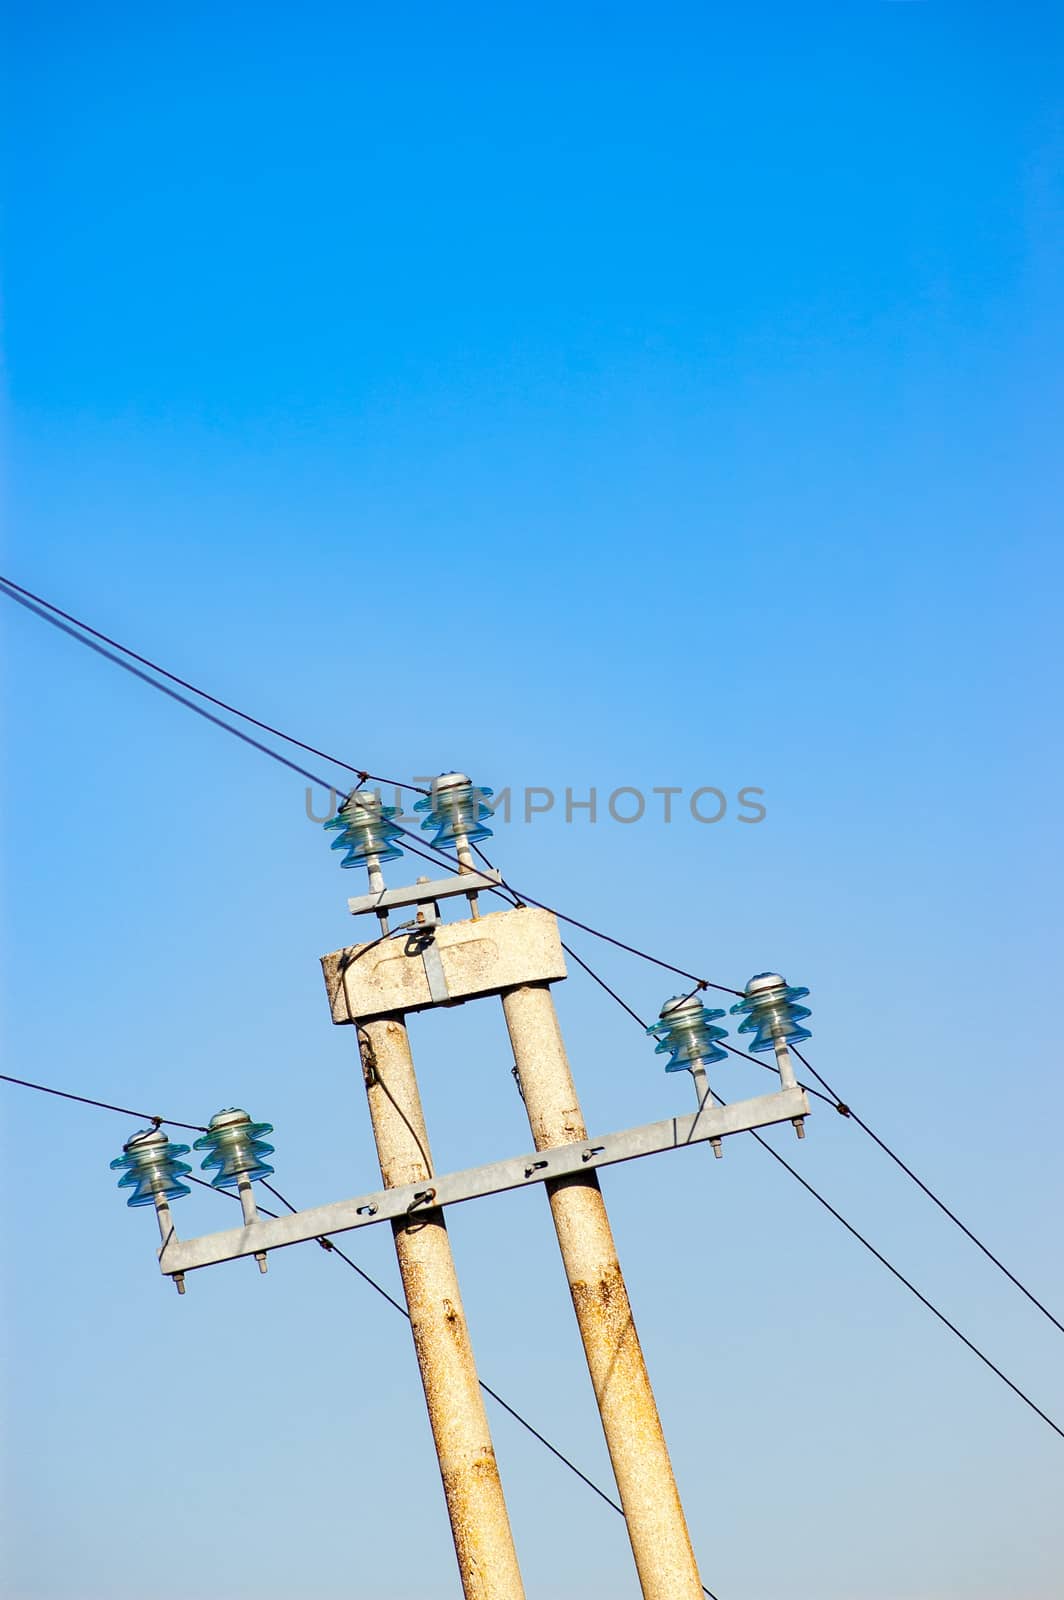 Electric power line gainst clear blue sky by MaxalTamor